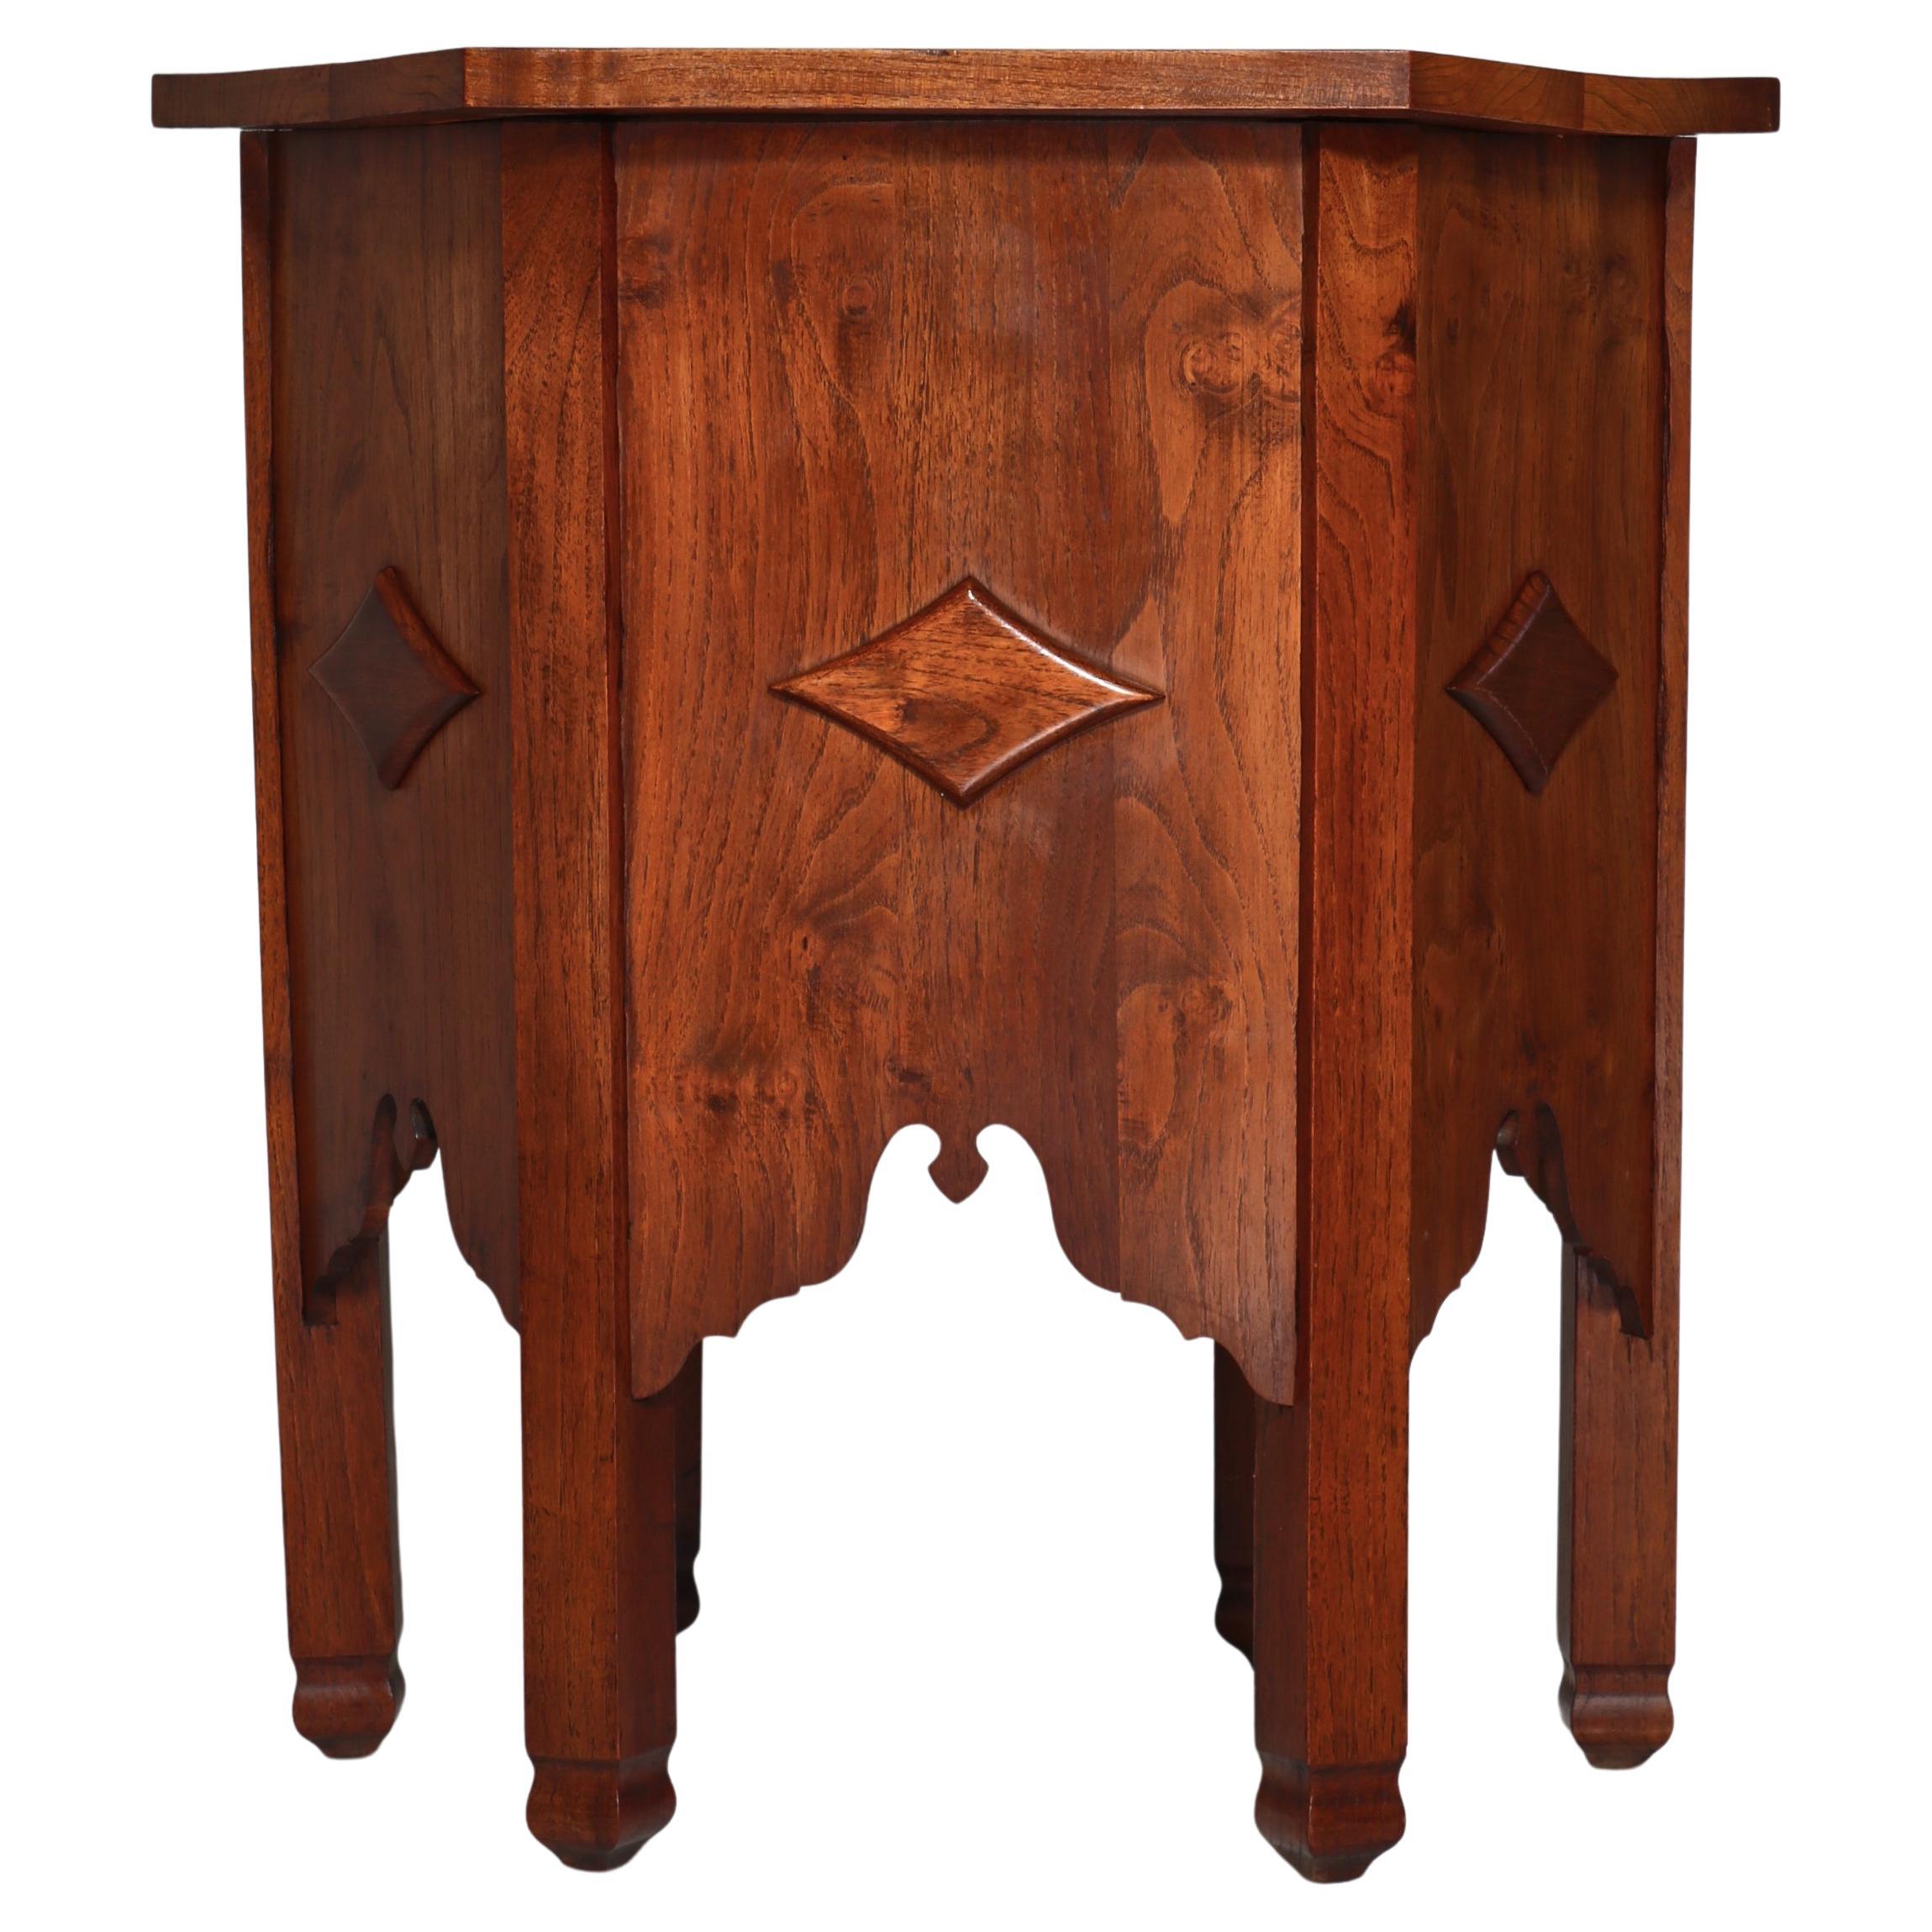 Art Nouveau Hexagonal Side Table by Danish Cabinetmaker, Carved Elm Tree, 1930s For Sale